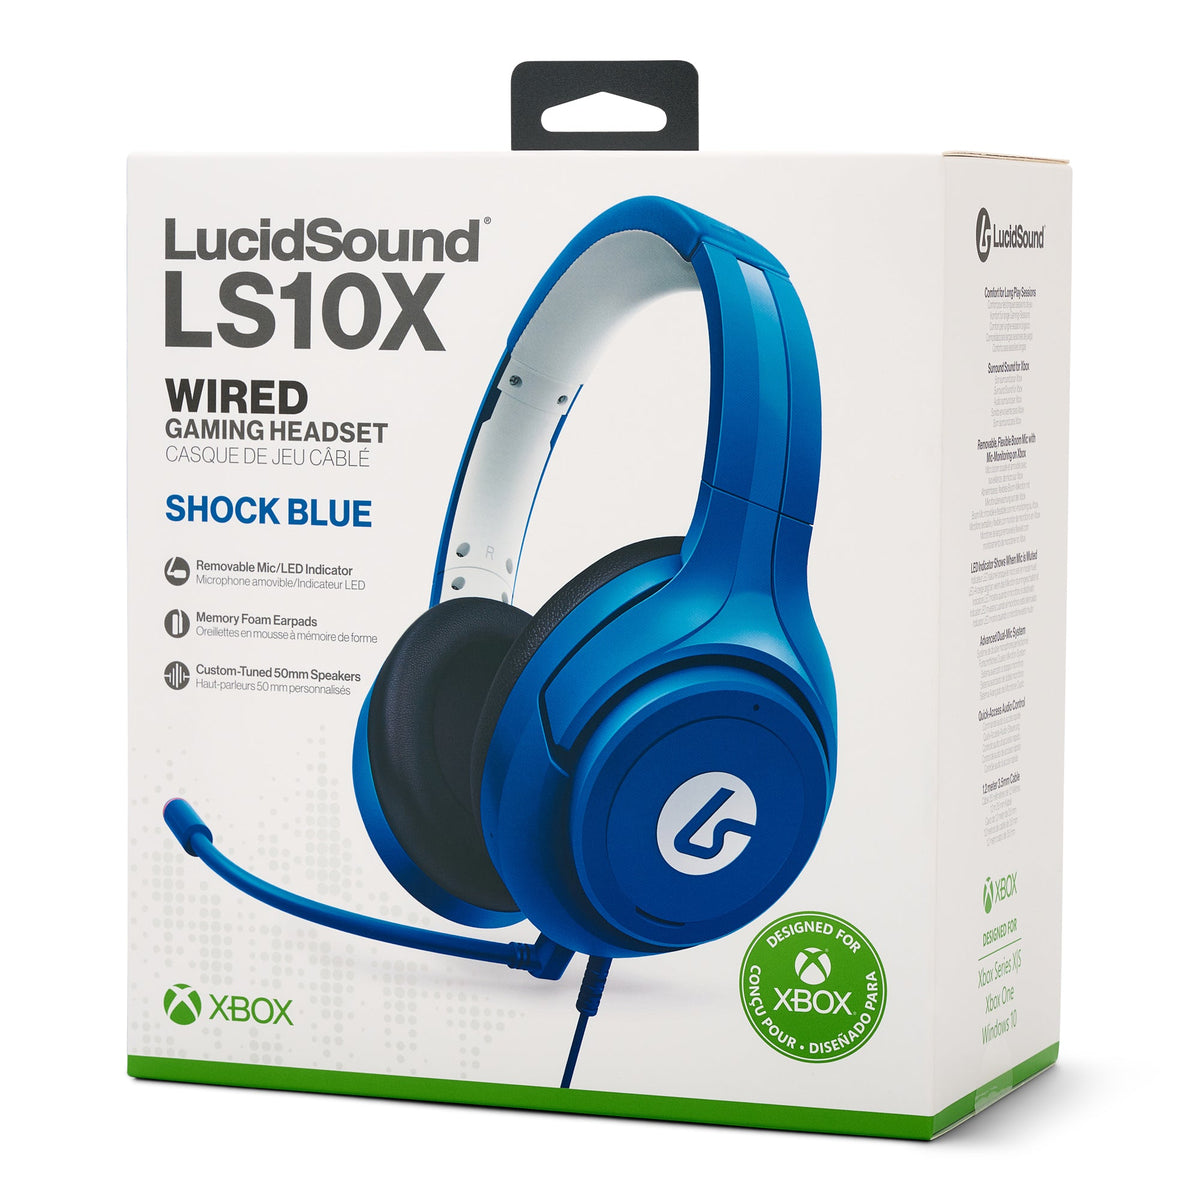 LucidSound LS10X Wired Gaming Headset for Xbox Series X|S - Shock Blue